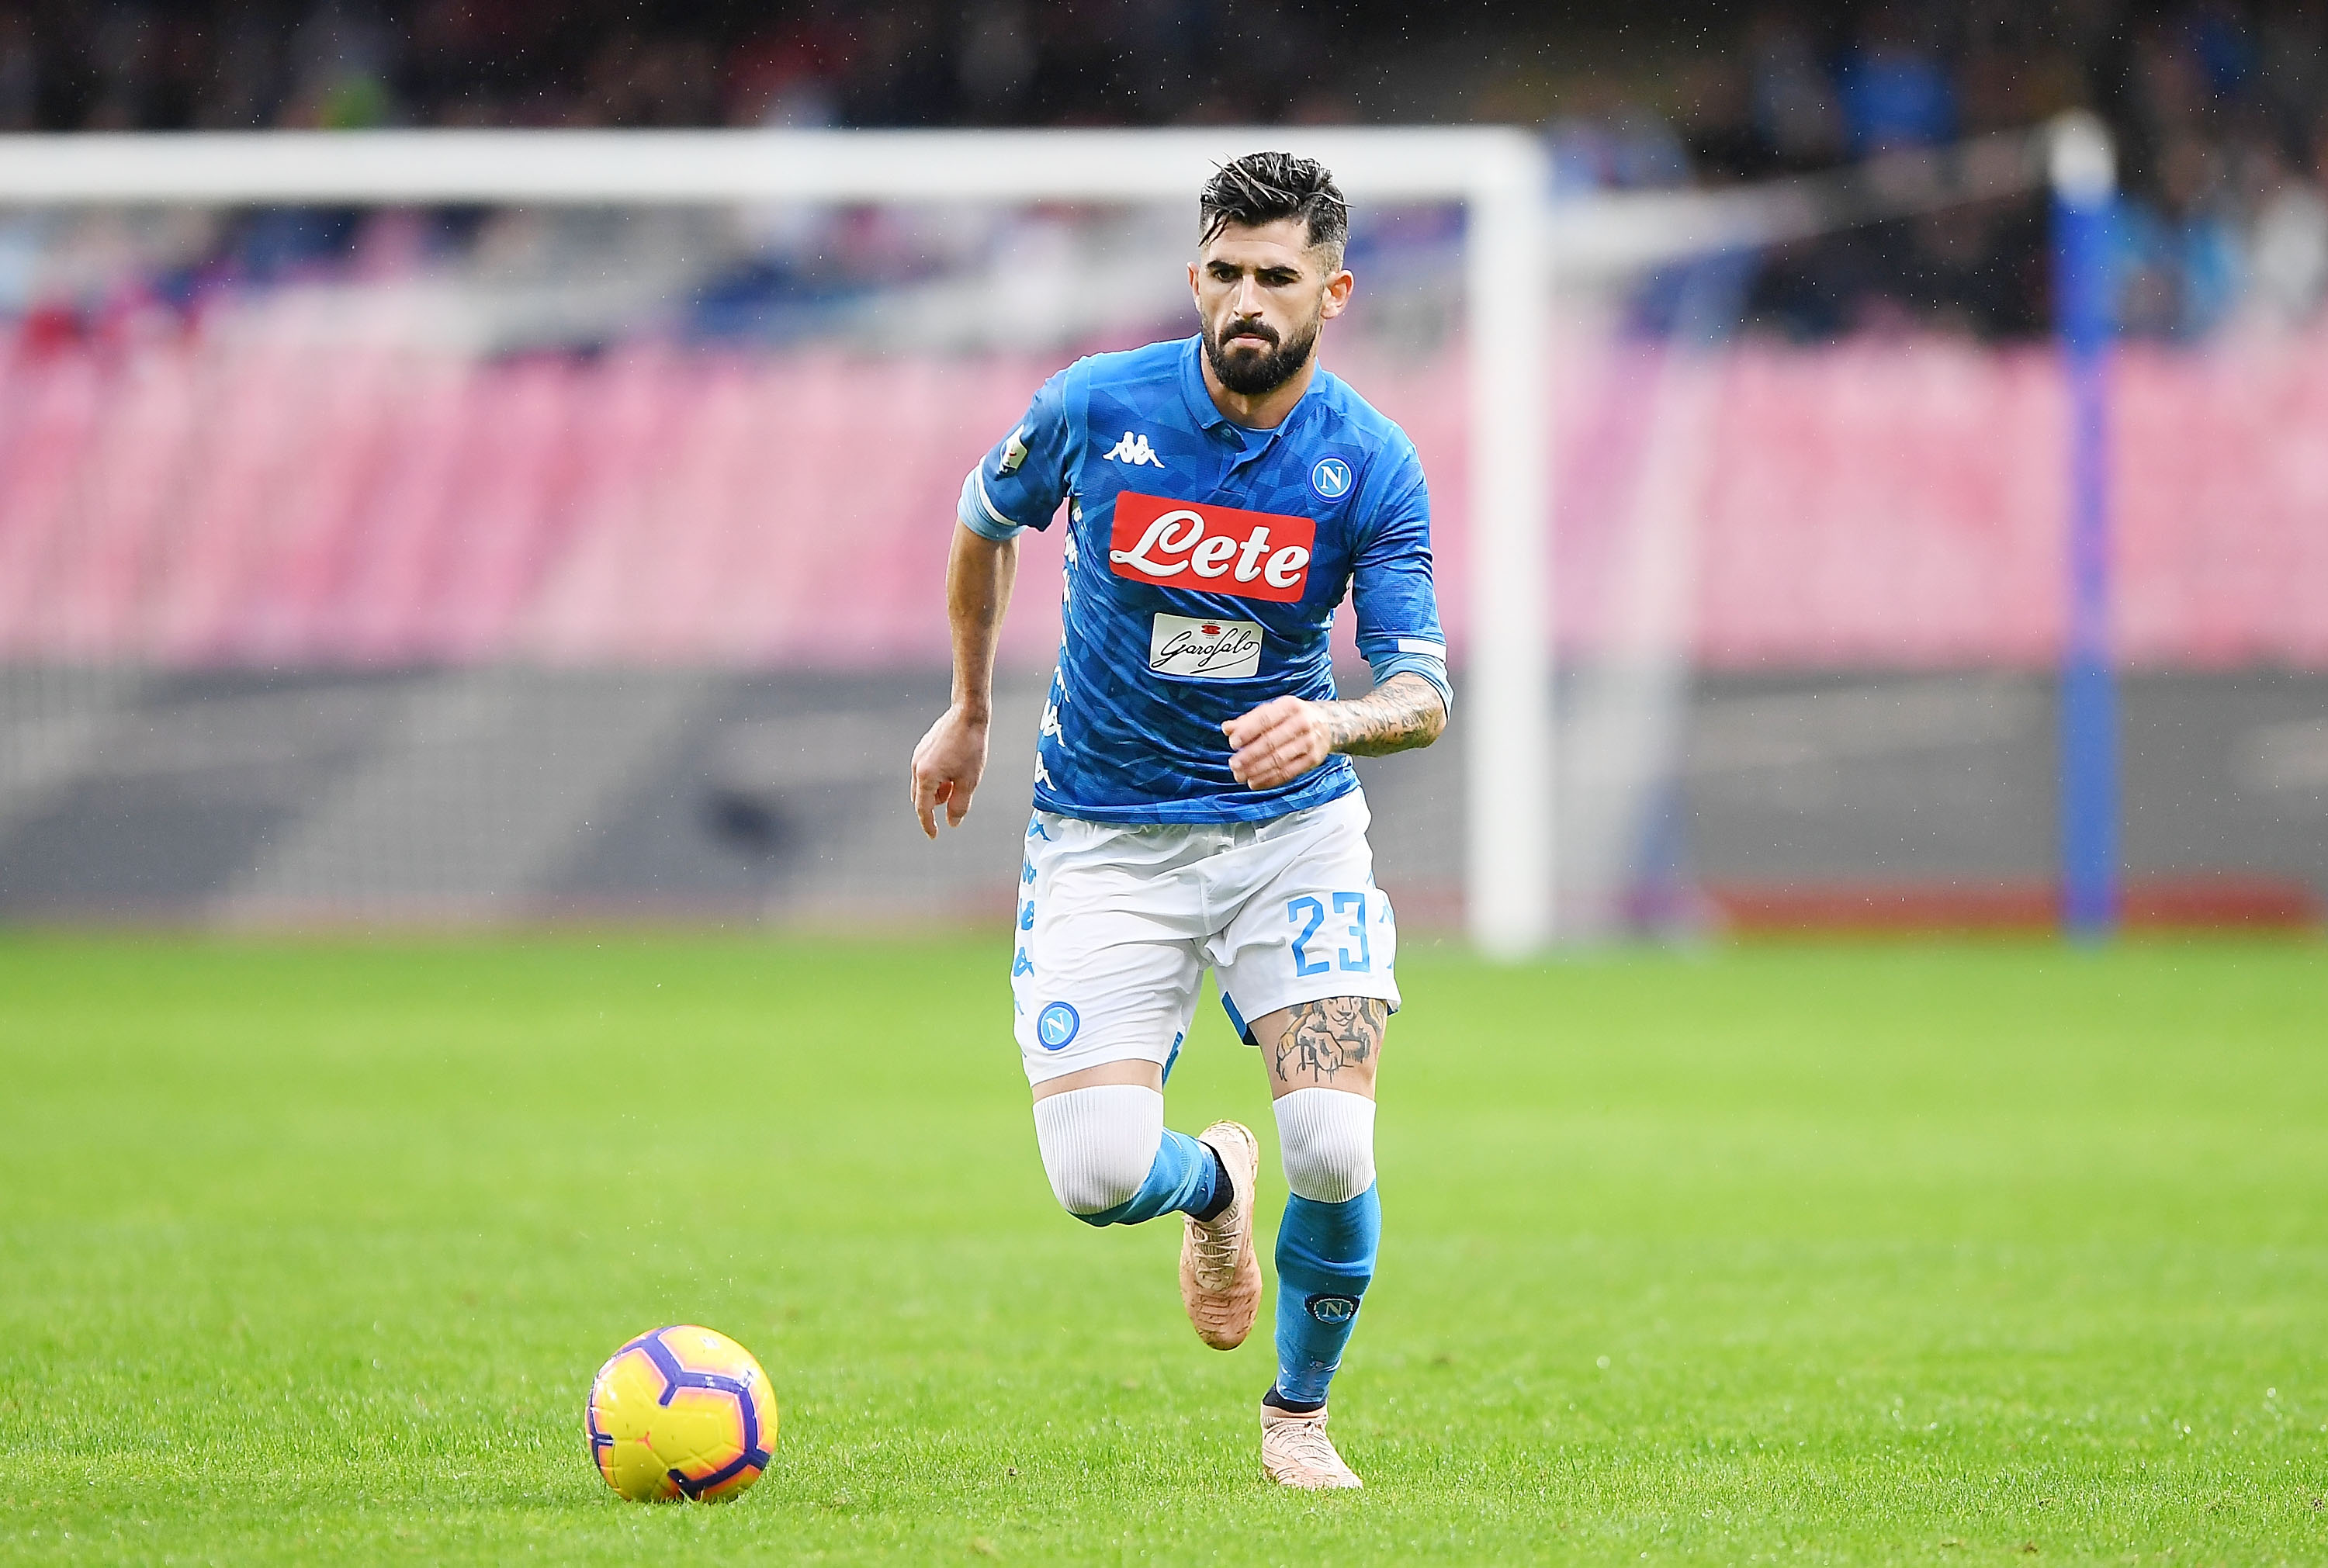 NAPLES, ITALY - NOVEMBER 25:  Elseid Hysaj of SSC Napoli in action during the Serie A match between SSC Napoli and Chievo Verona at Stadio San Paolo on November 25, 2018 in Naples, Italy.  (Photo by Francesco Pecoraro/Getty Images)